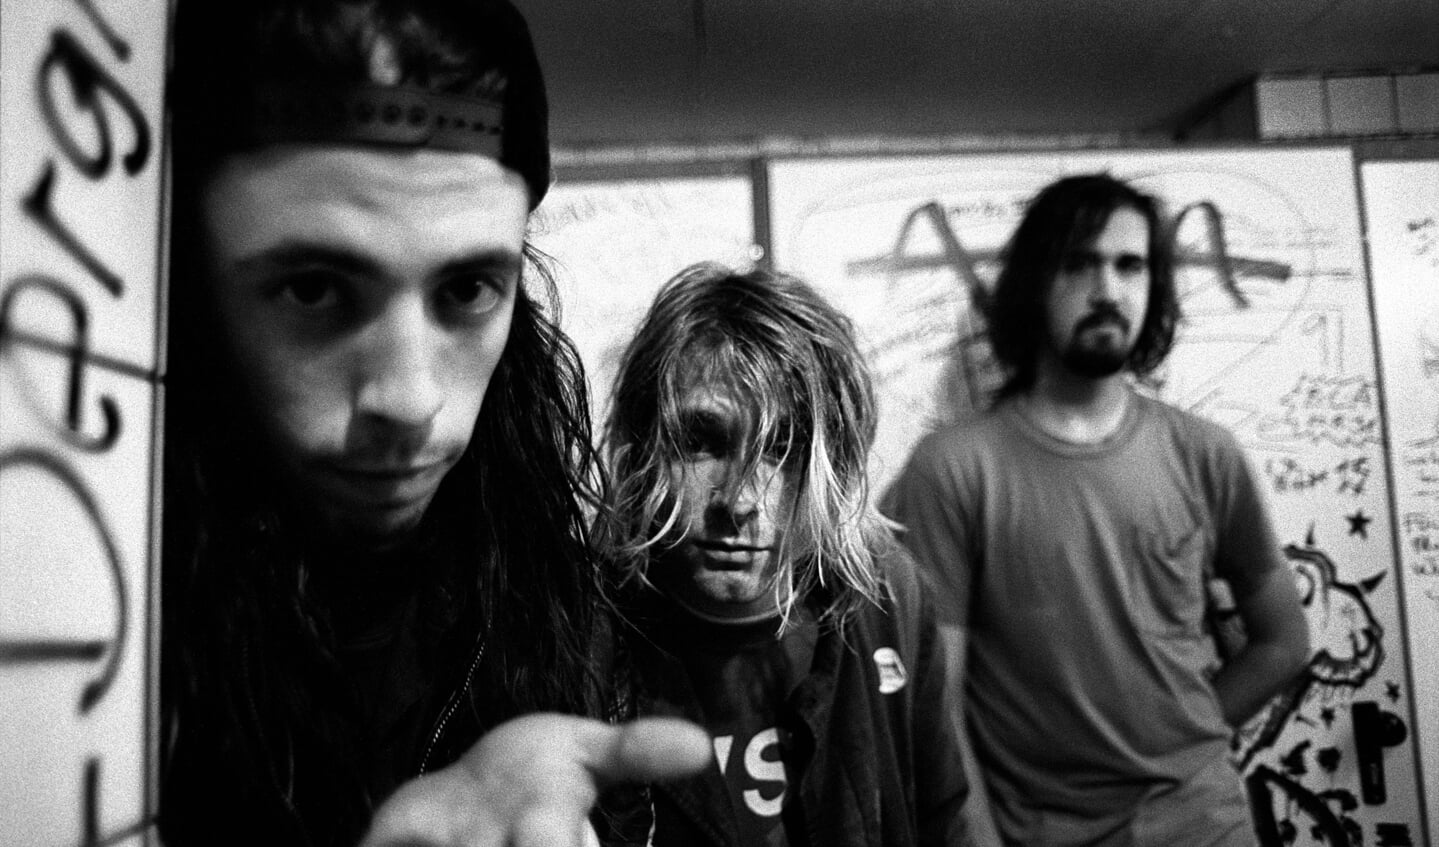 12-11-1991 Frankfurt Nirvana. Left to right Dave Grohl (drums), Kurt Cobain (vocals/guitar) and Krist Novoselic (bass). Grunge from Seattle. Foto: Paul Bergen